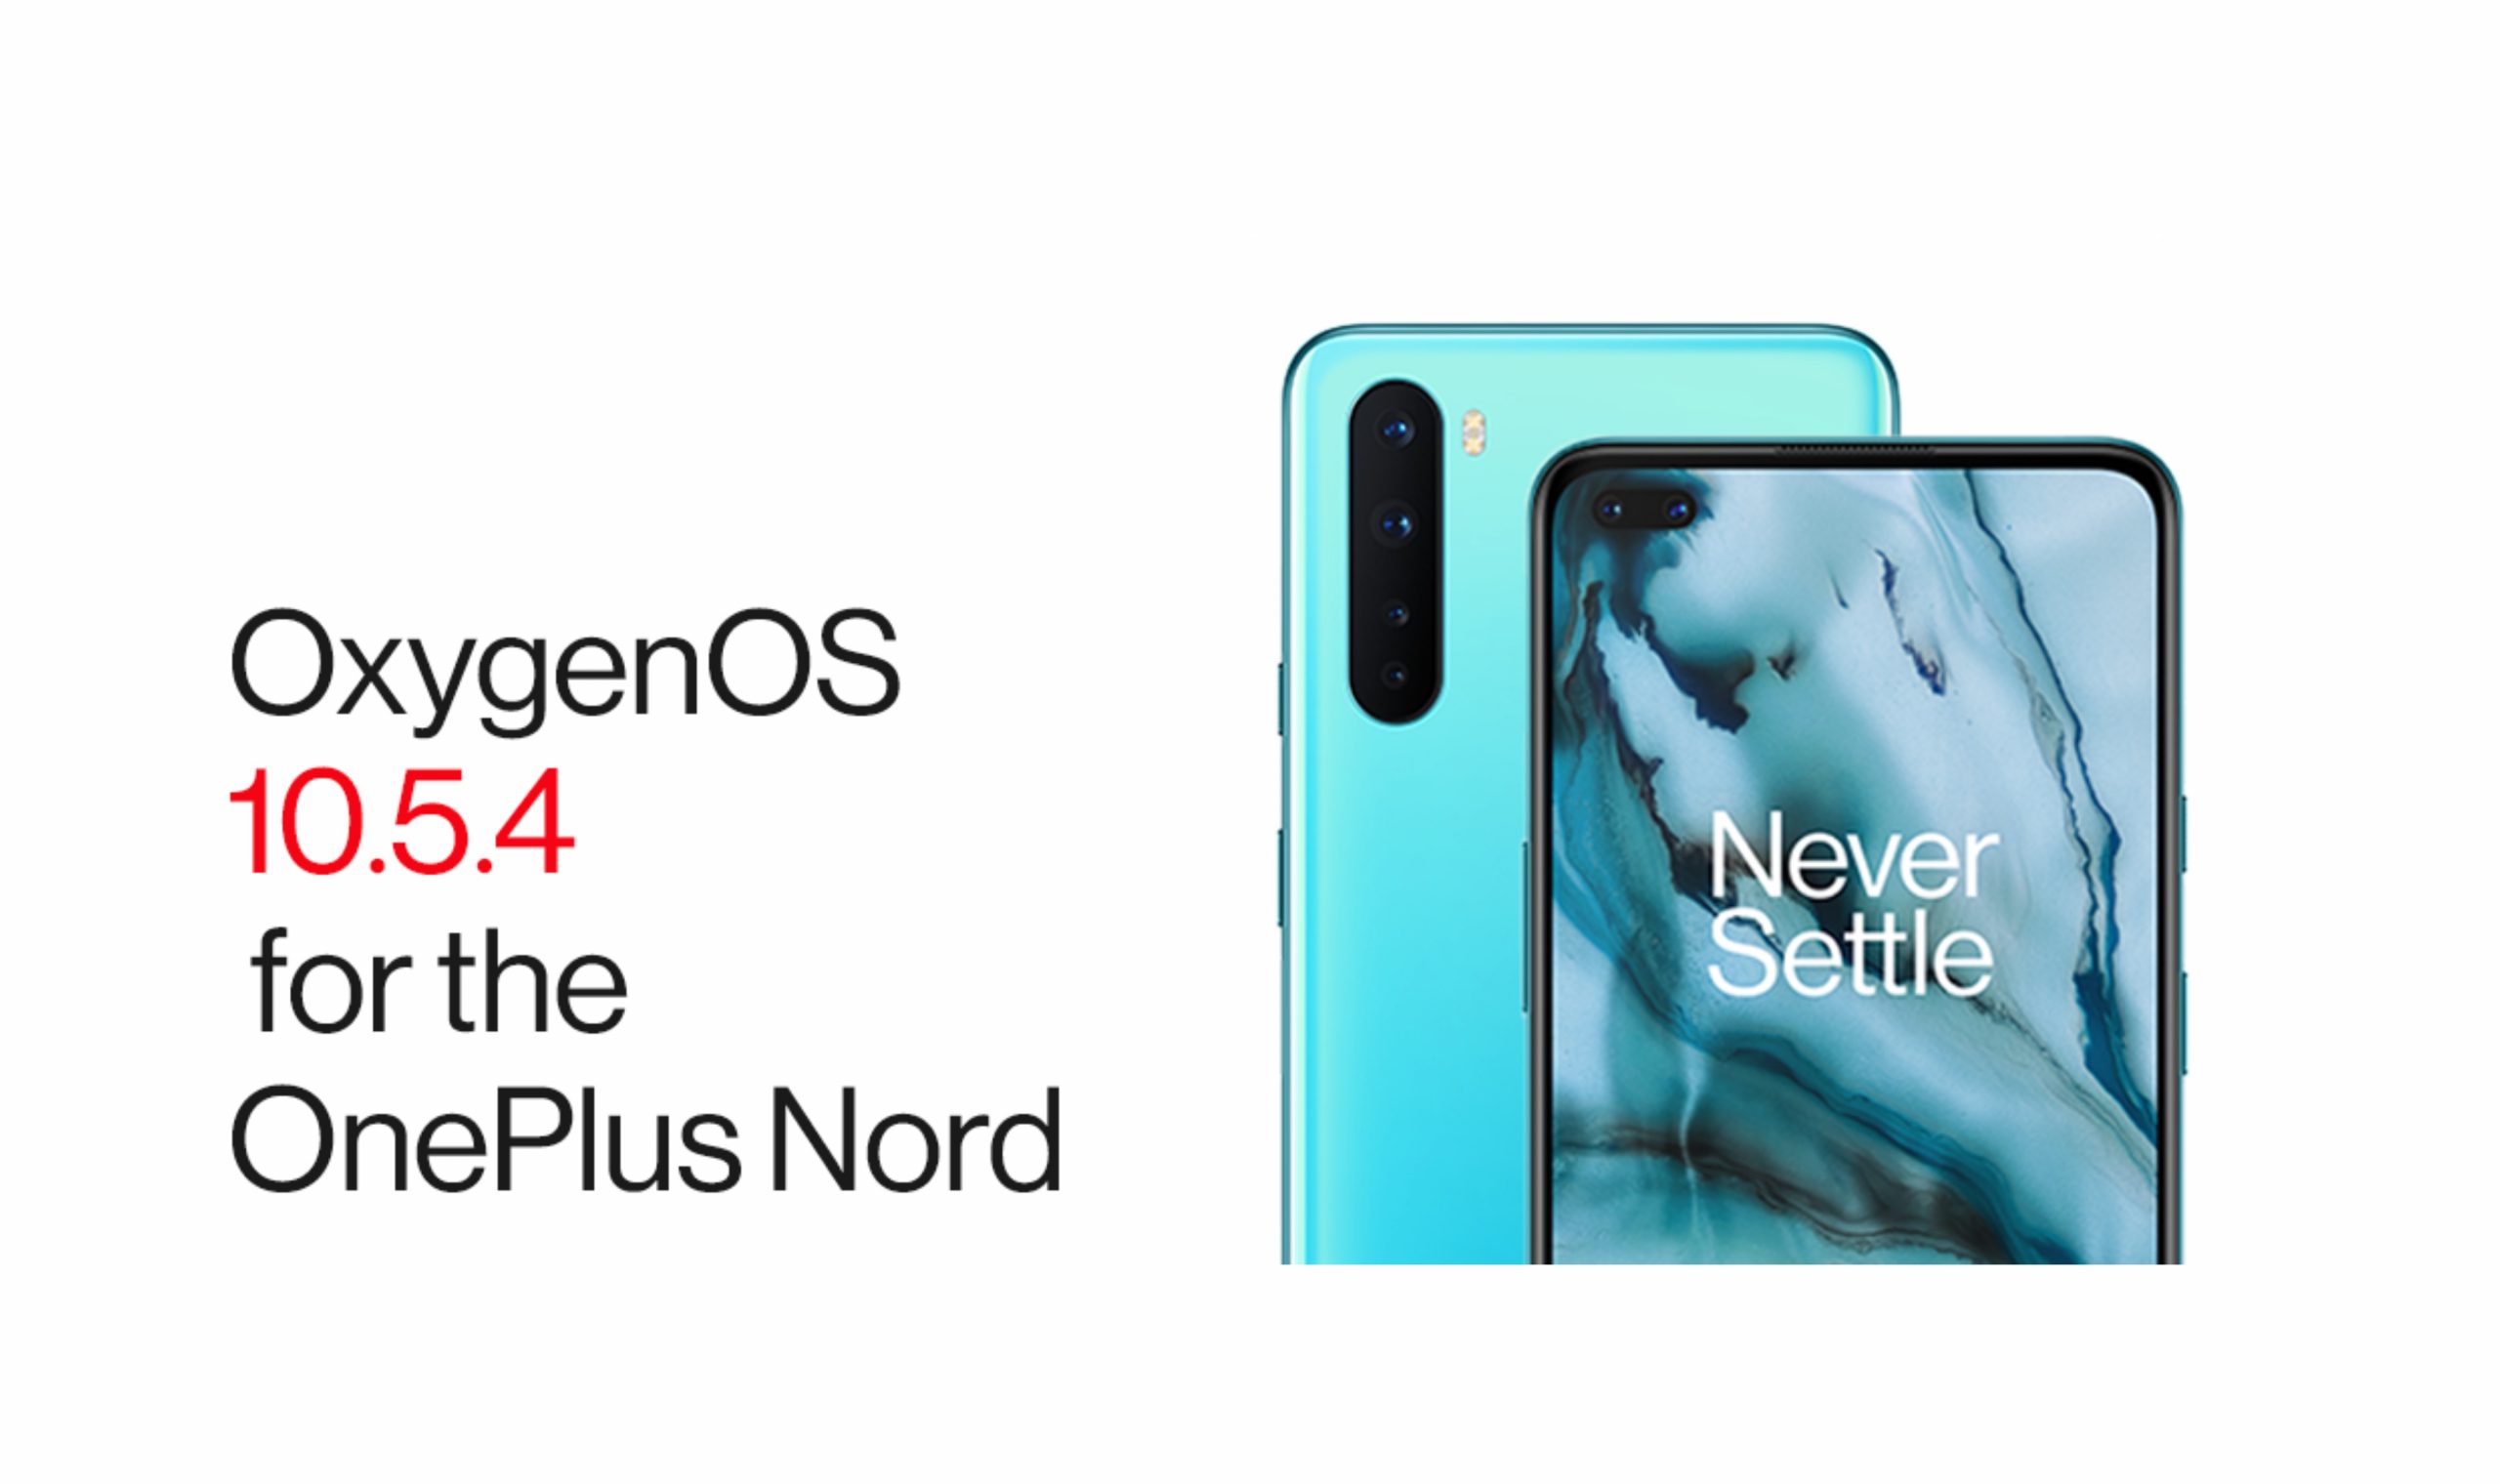 OxygenOS 10.5.4 for OnePlus Nord improves display, low-light selfies, macro camera & more